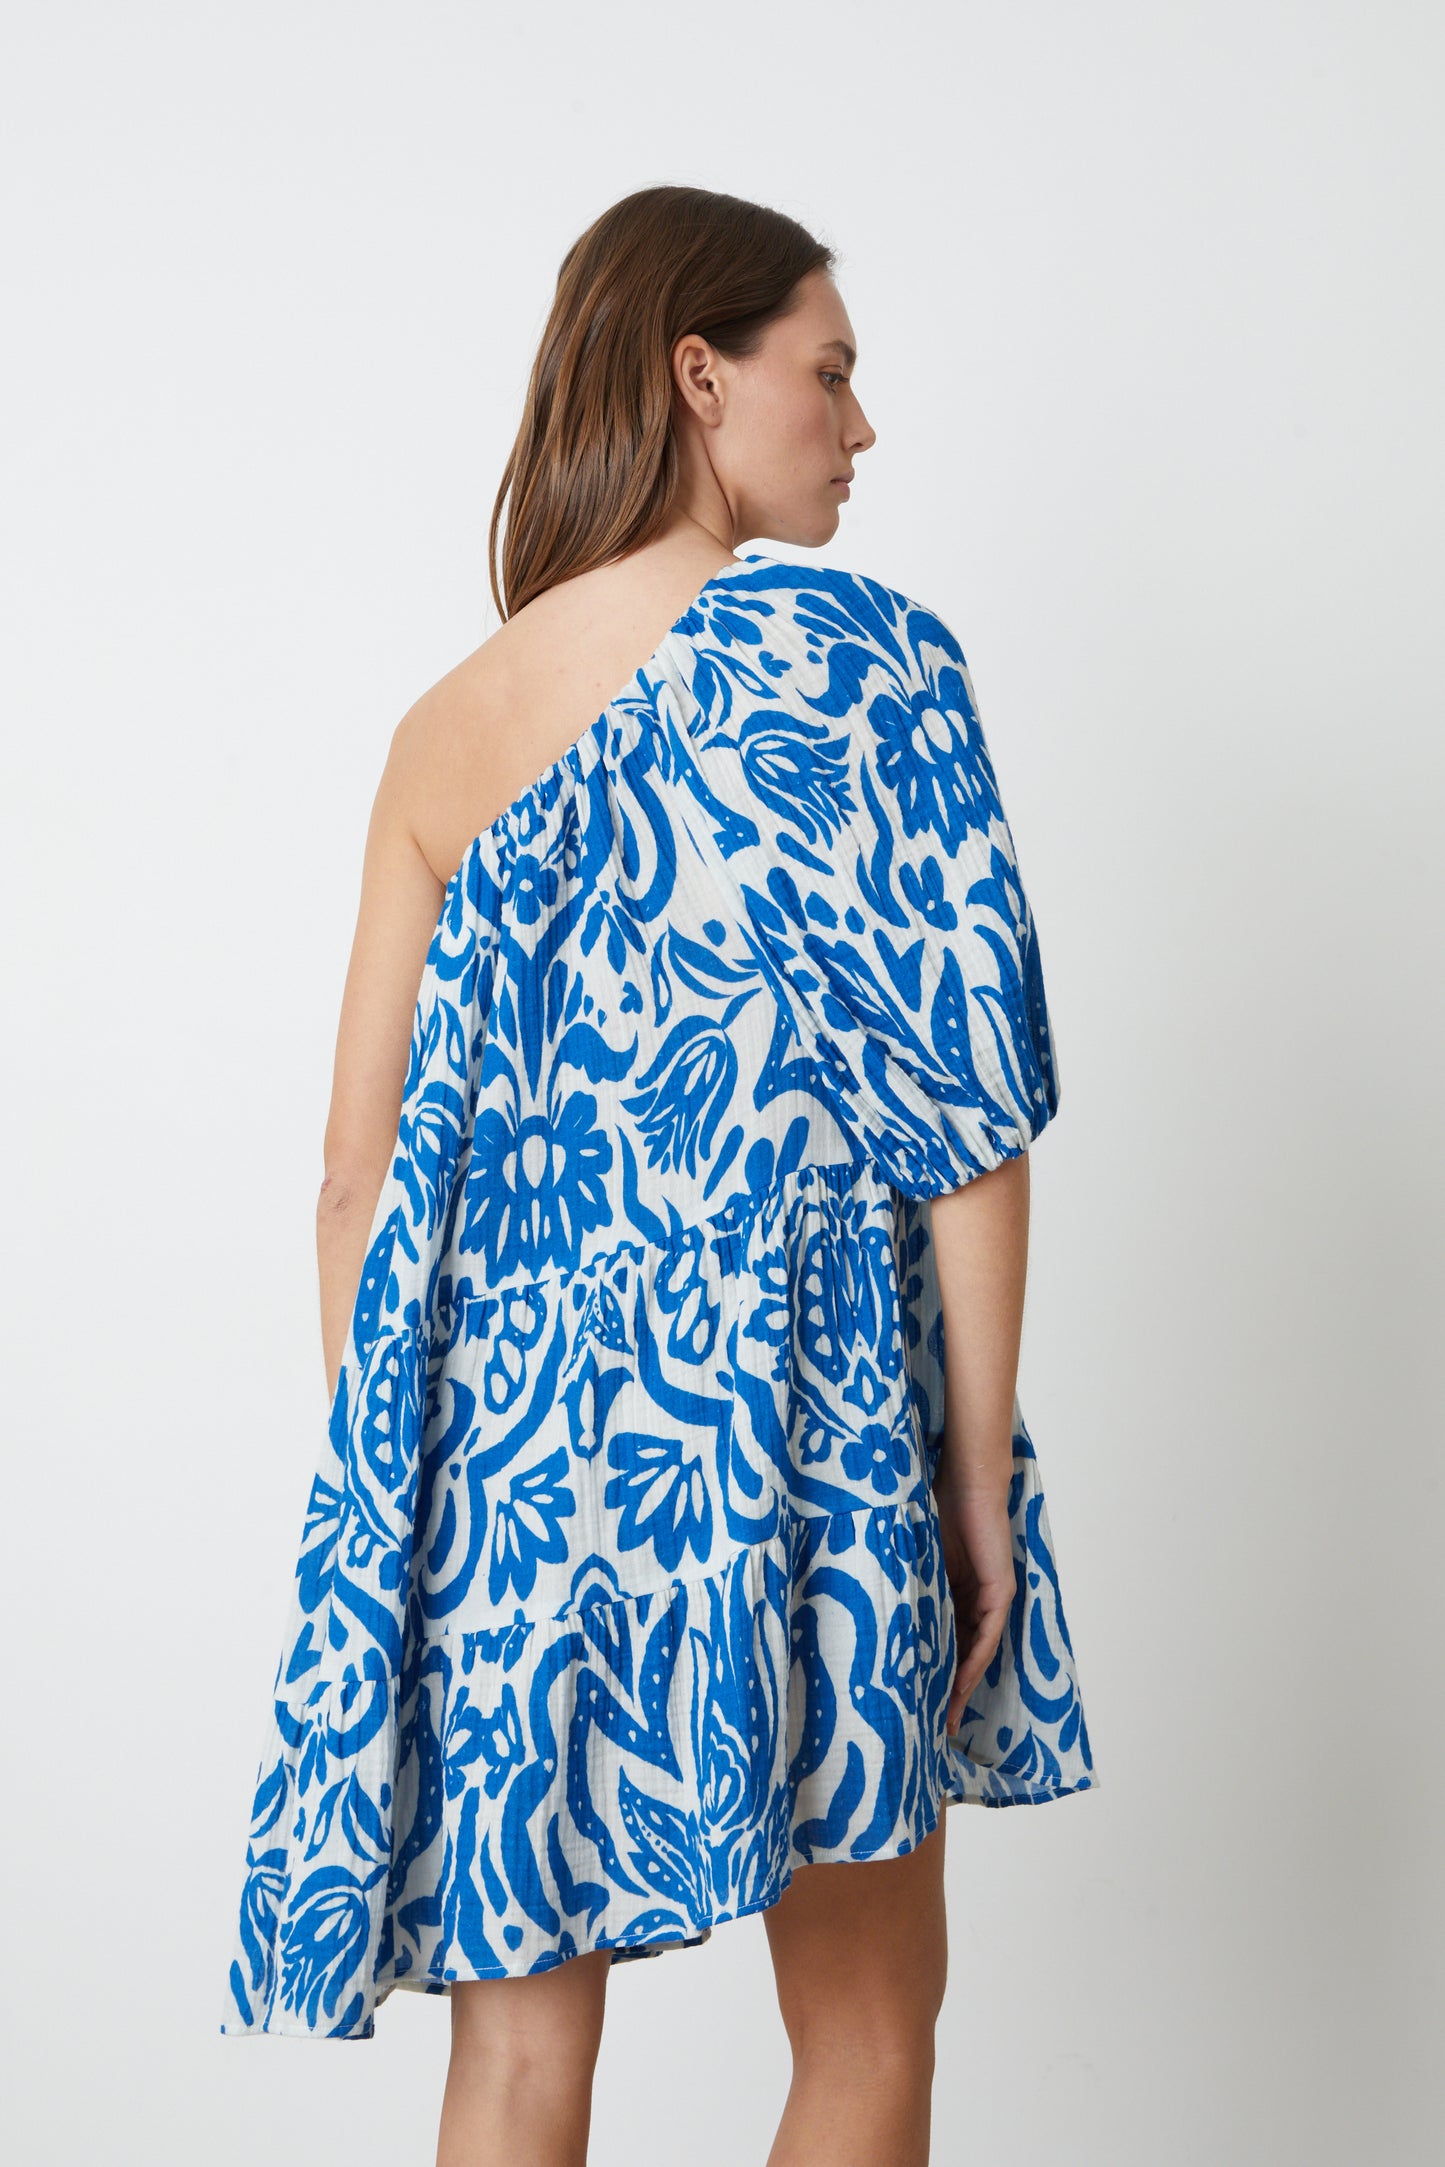 The back view of a woman wearing the Velvet by Graham & Spencer GRETCHEN PRINTED ONE SHOULDER DRESS.-26774928326849